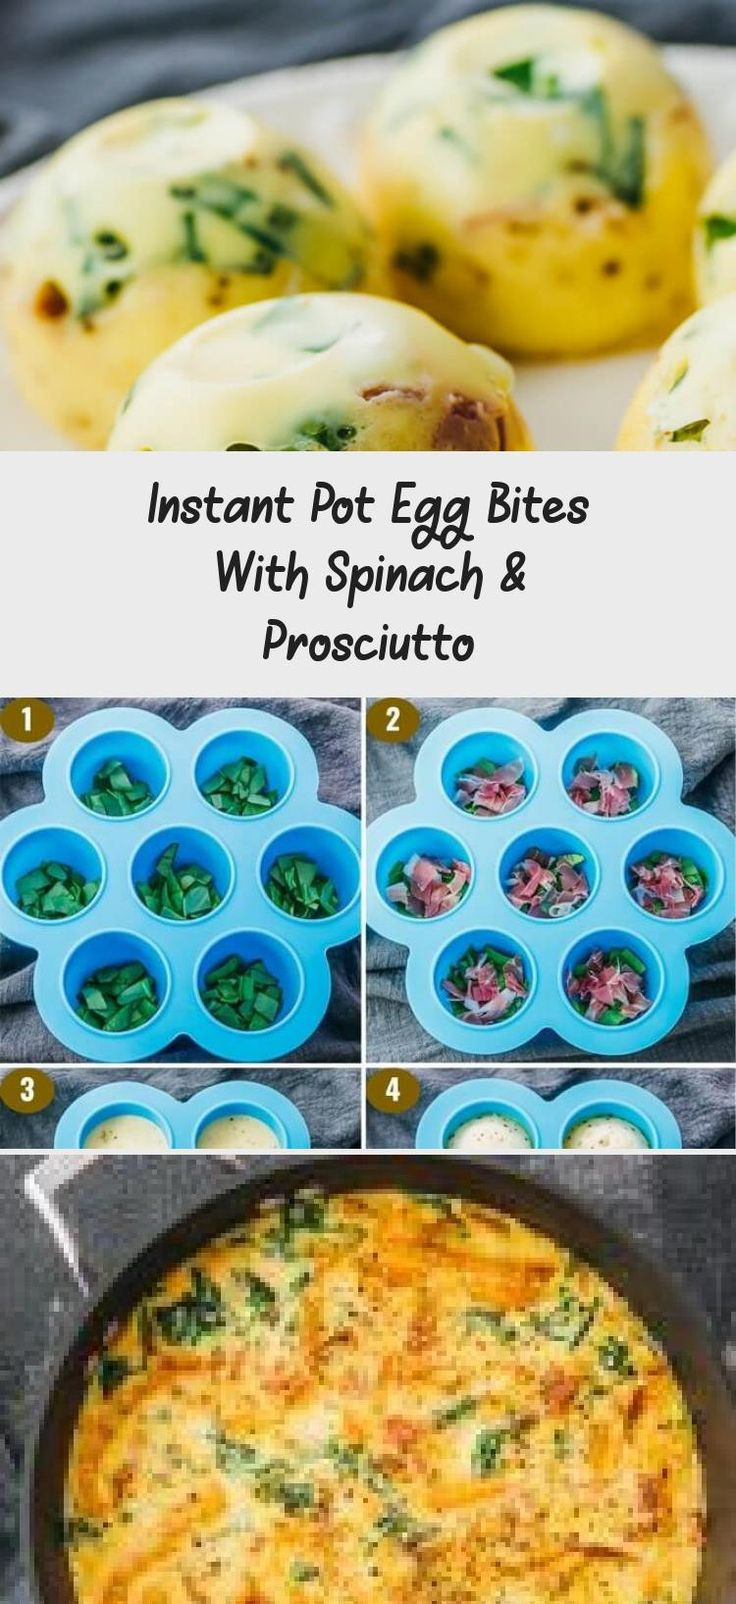 Sous Vide Egg Bites Instant Pot Keto
 Here s a fabulously easy and healthy recipe for Instant